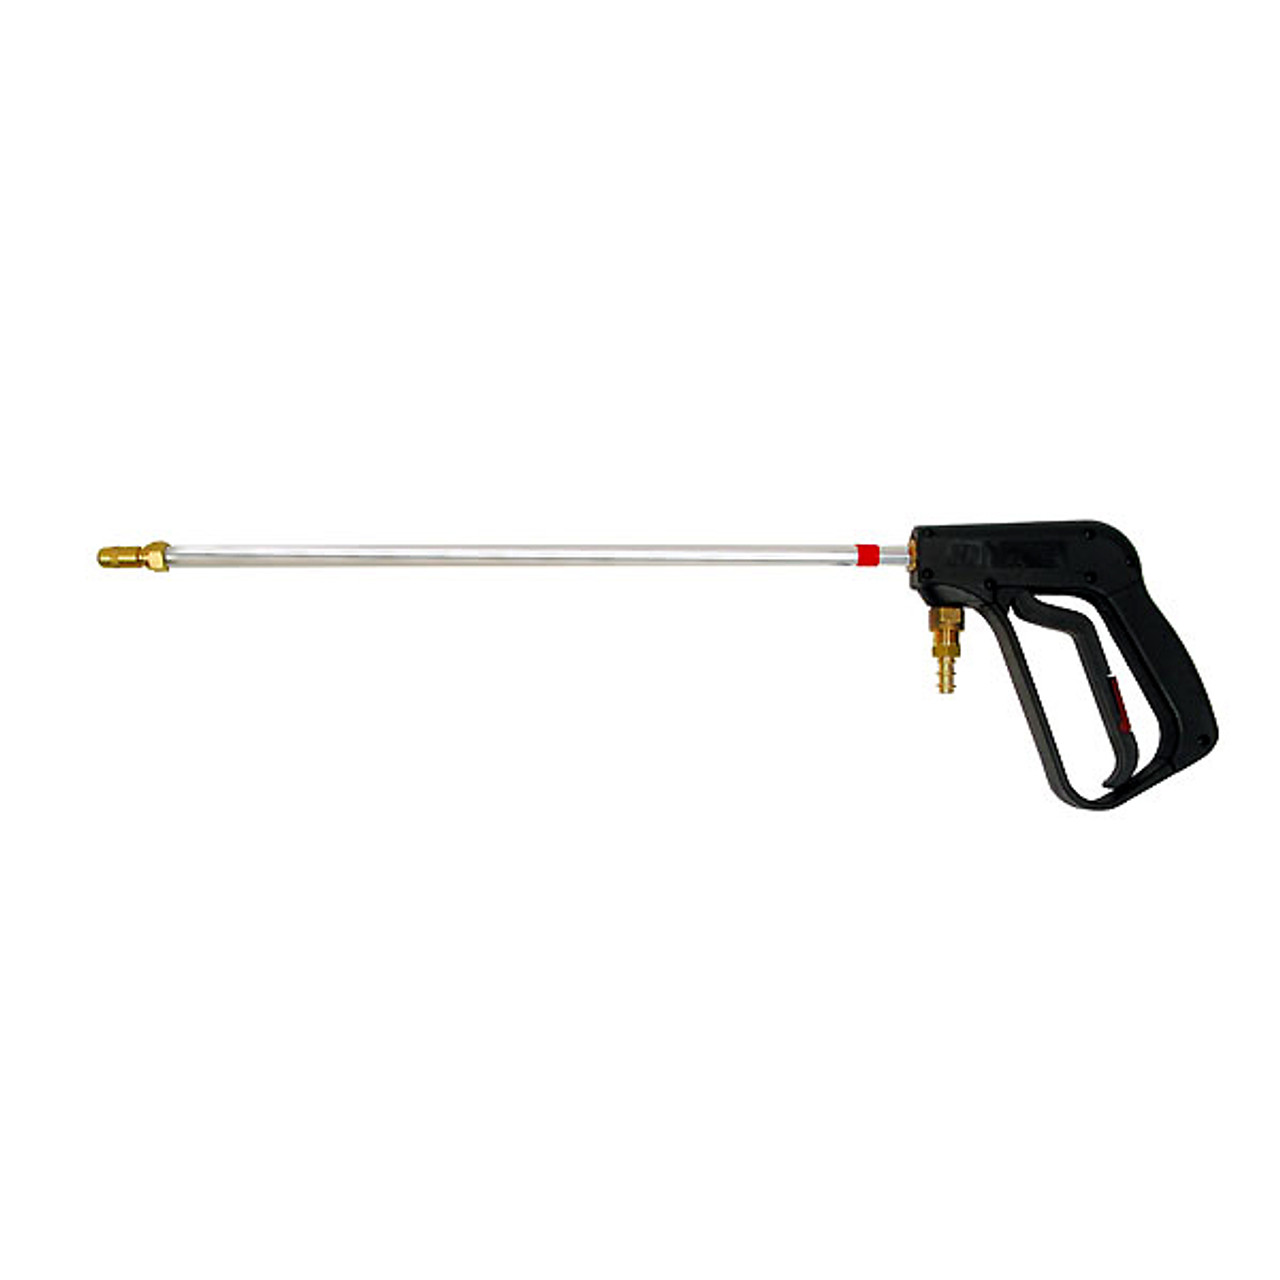 Comet - 24" Heavy Duty Low Pressure Chemical Spray Wand